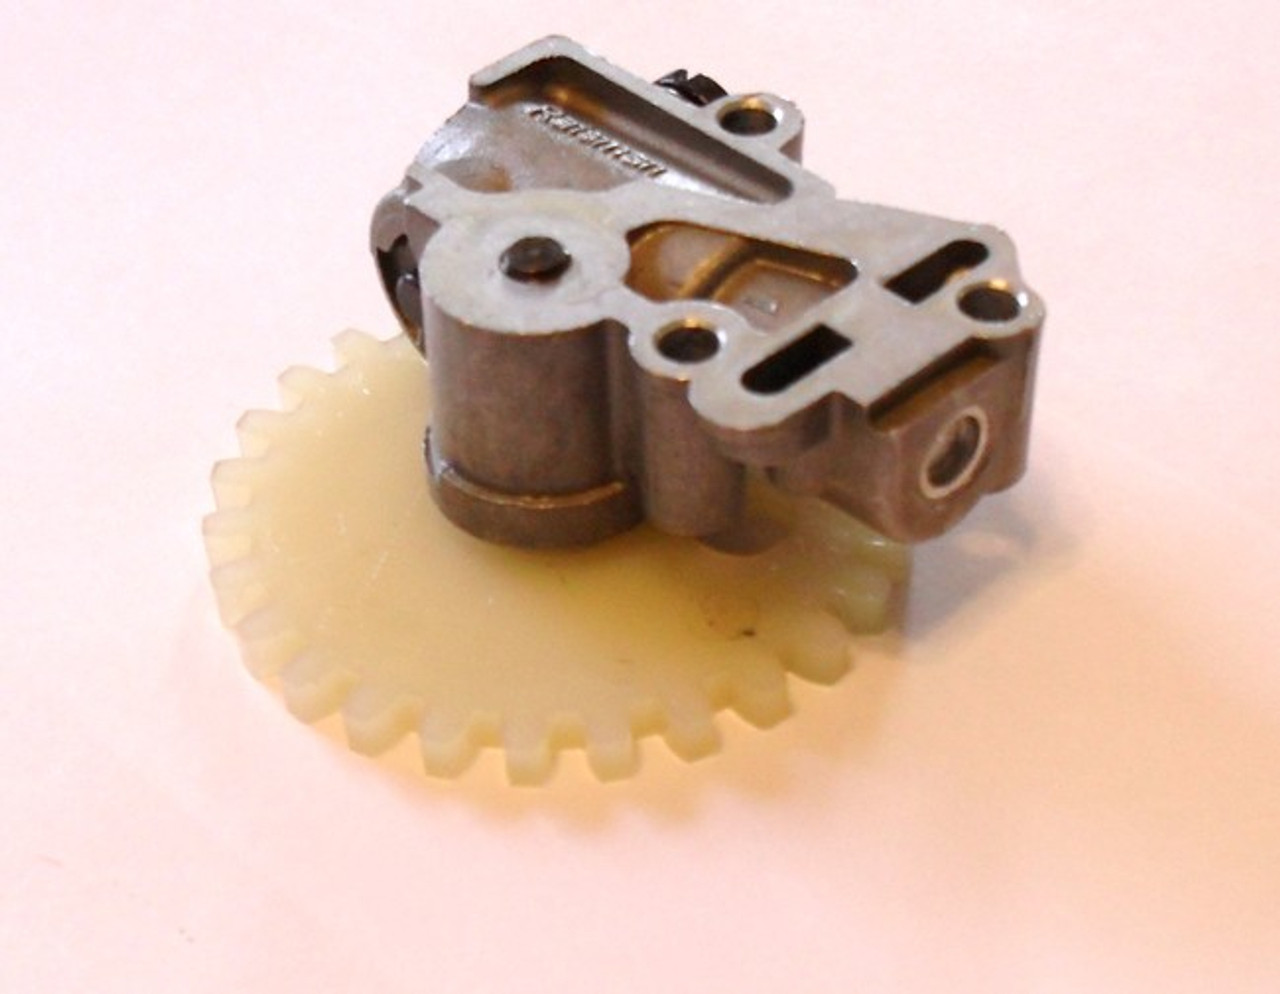 Oil Pump for Stihl 038, MS380, MS381, 11196403200, 1119-640-3200 chainsaw, chain saw oiler